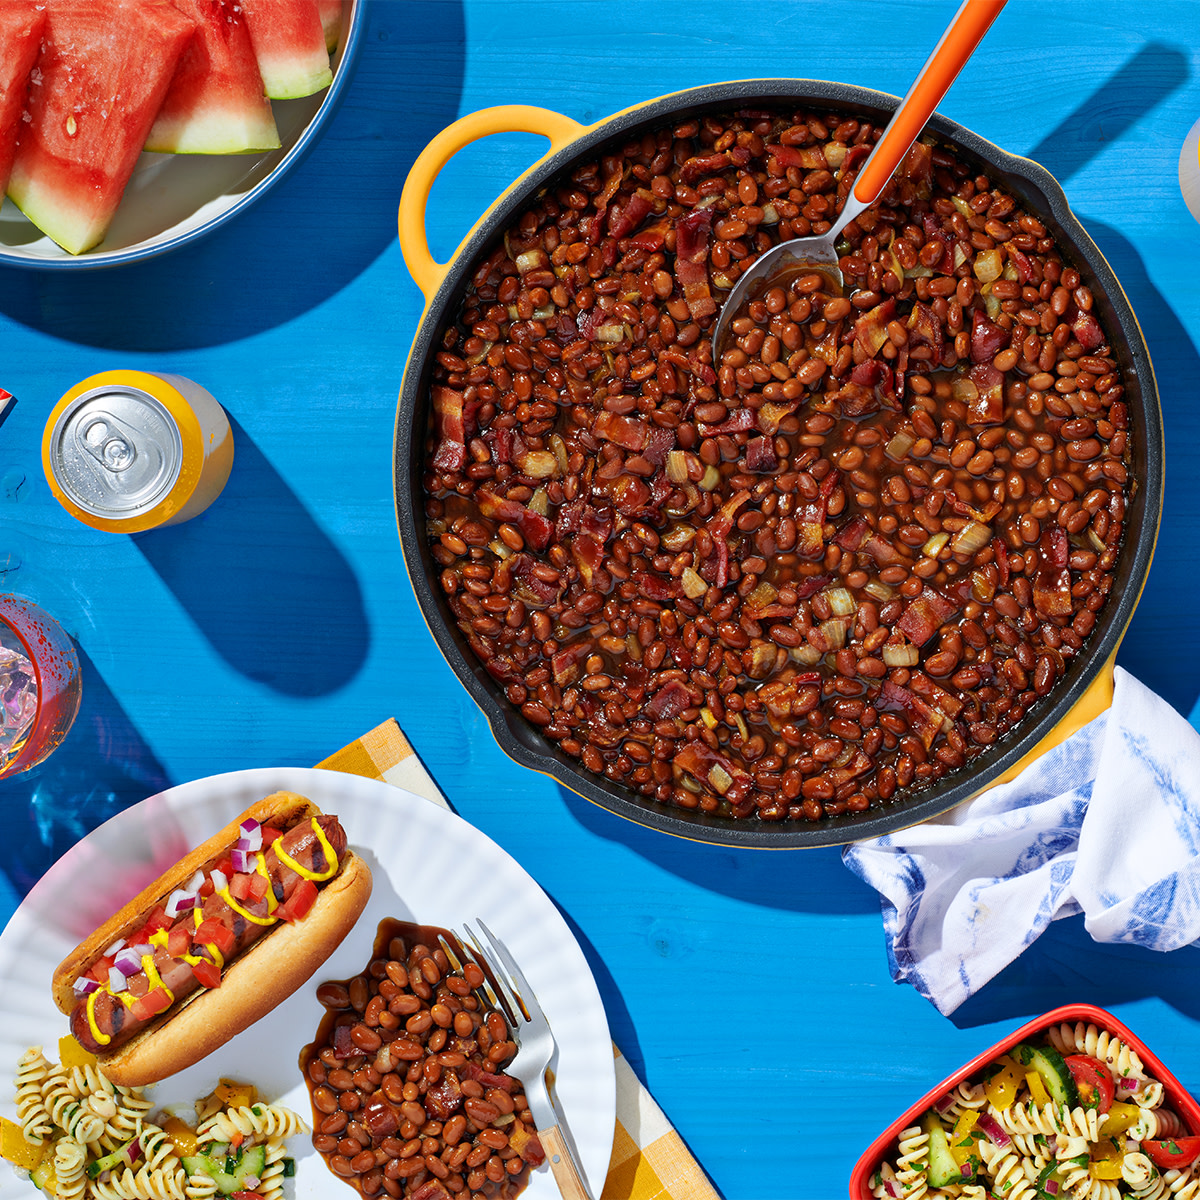 Bush's Original Baked Beans Seasoned with Bacon & Brown Sugar, Canned Beans, 55 oz - image 4 of 7